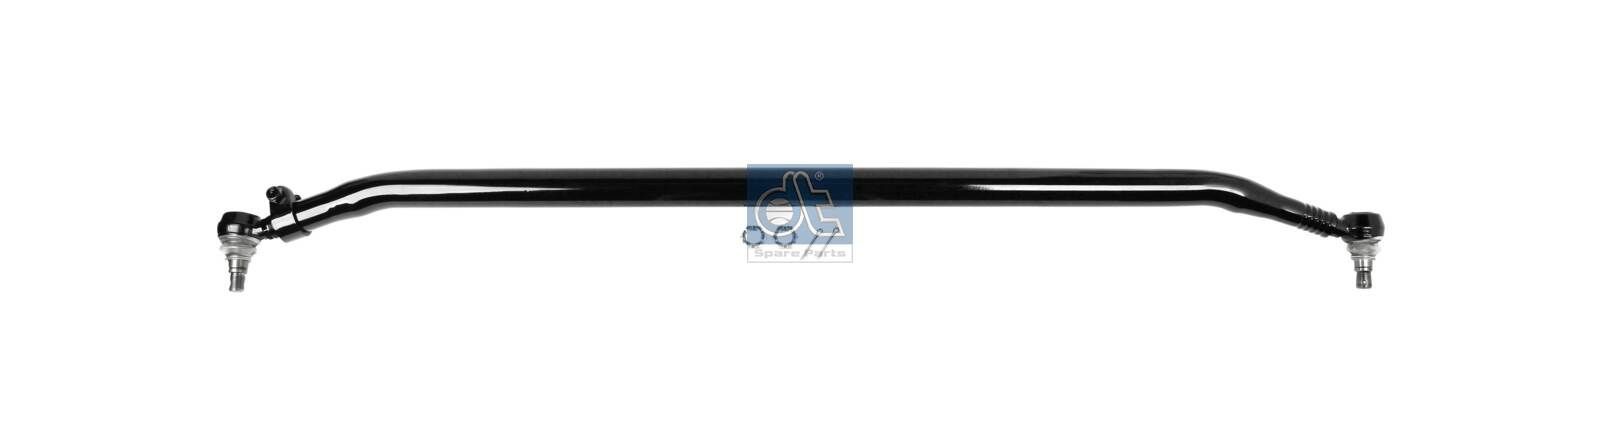 DT Spare Parts 6.53013 Rod Assembly 7421560957